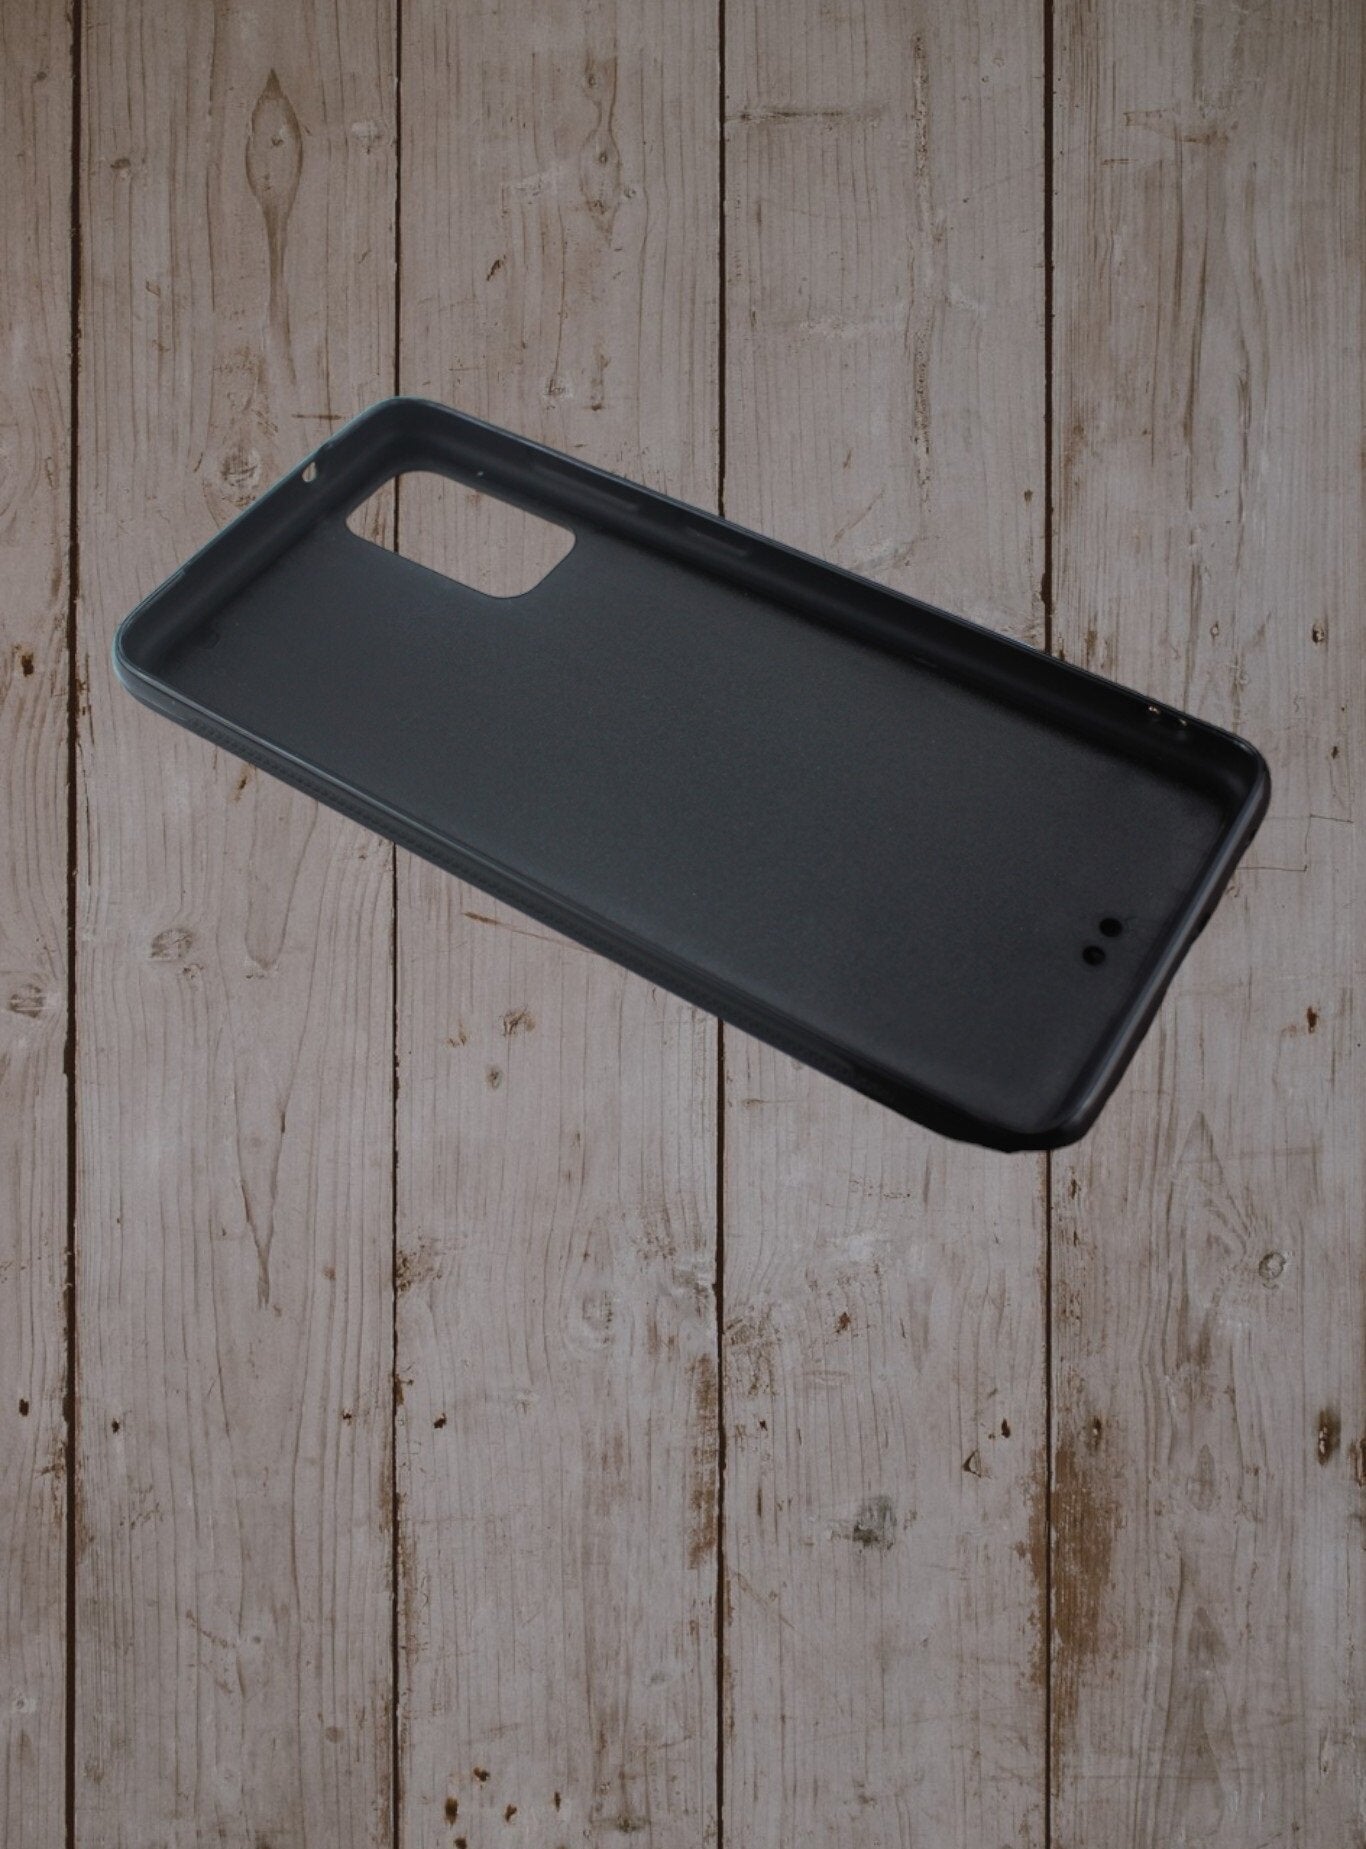 Coque One Plus - Loup